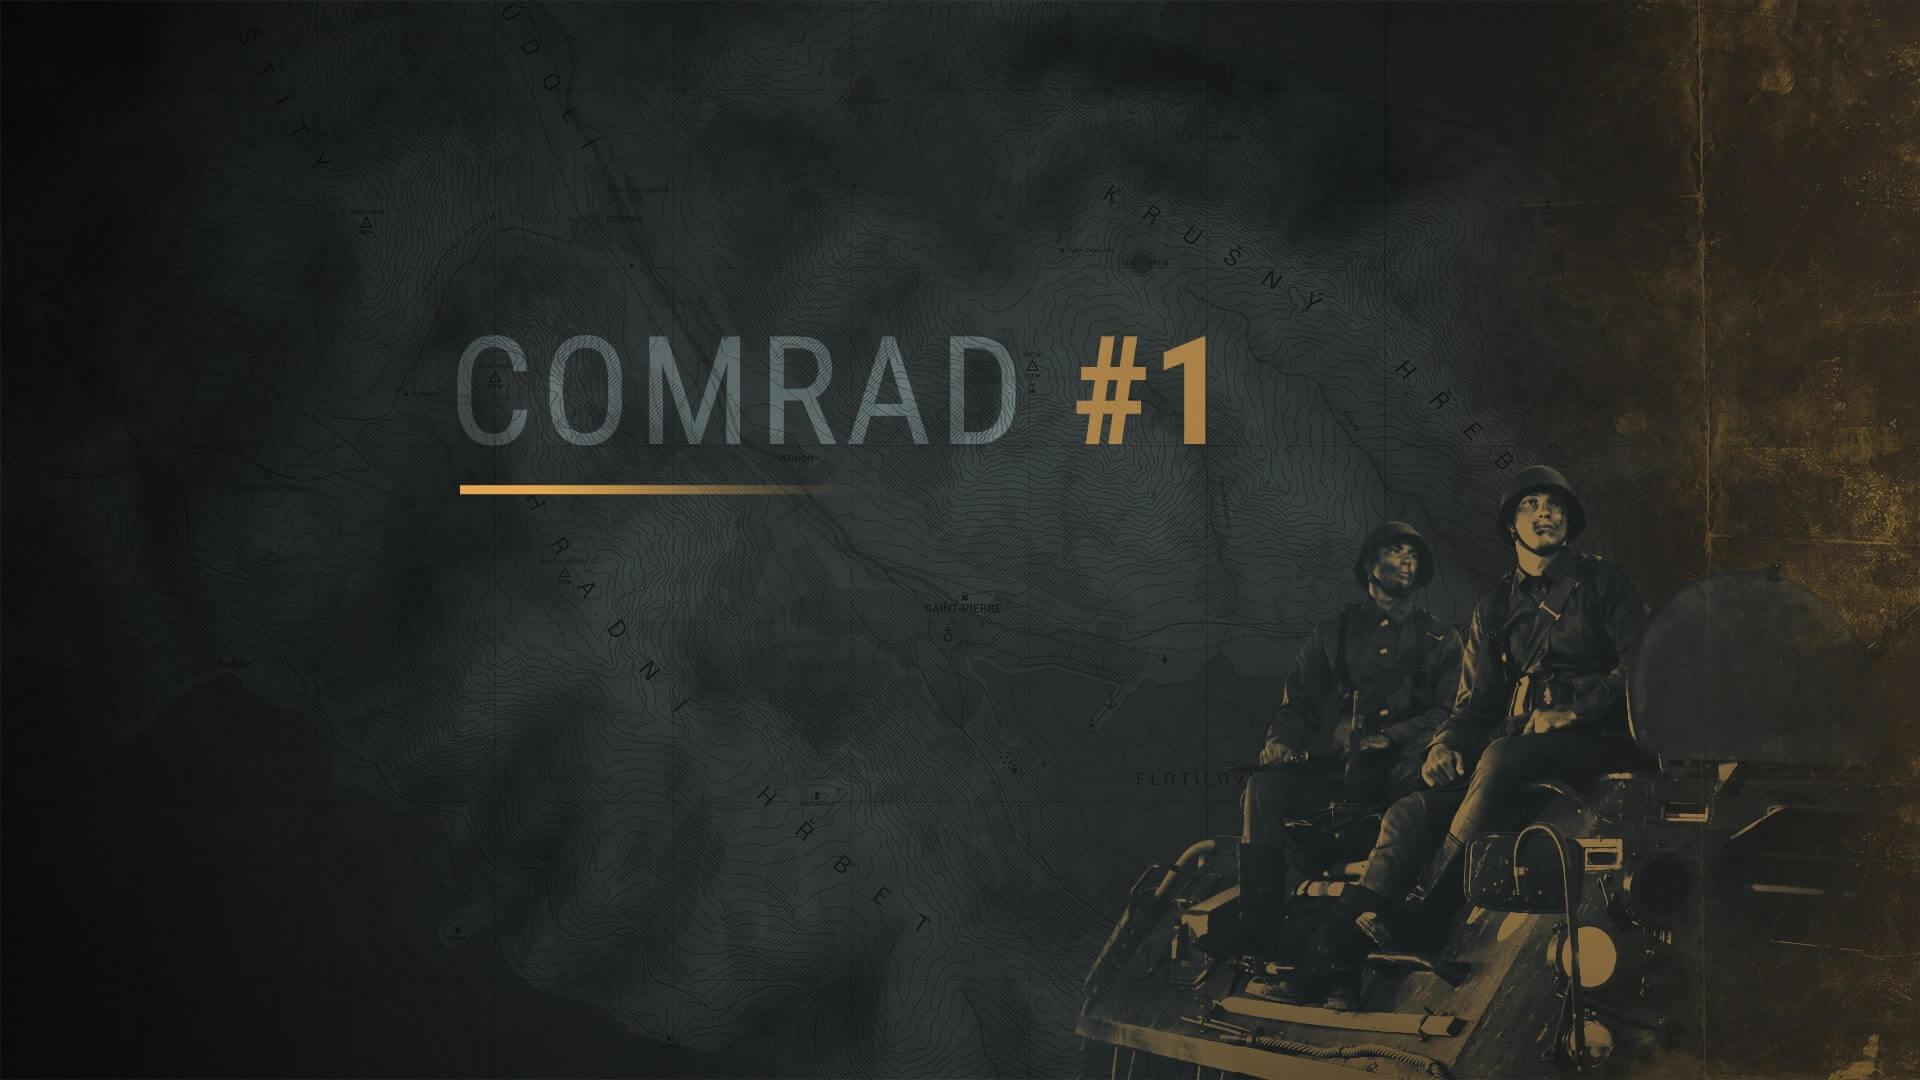 Cover image of #COMRAD 1